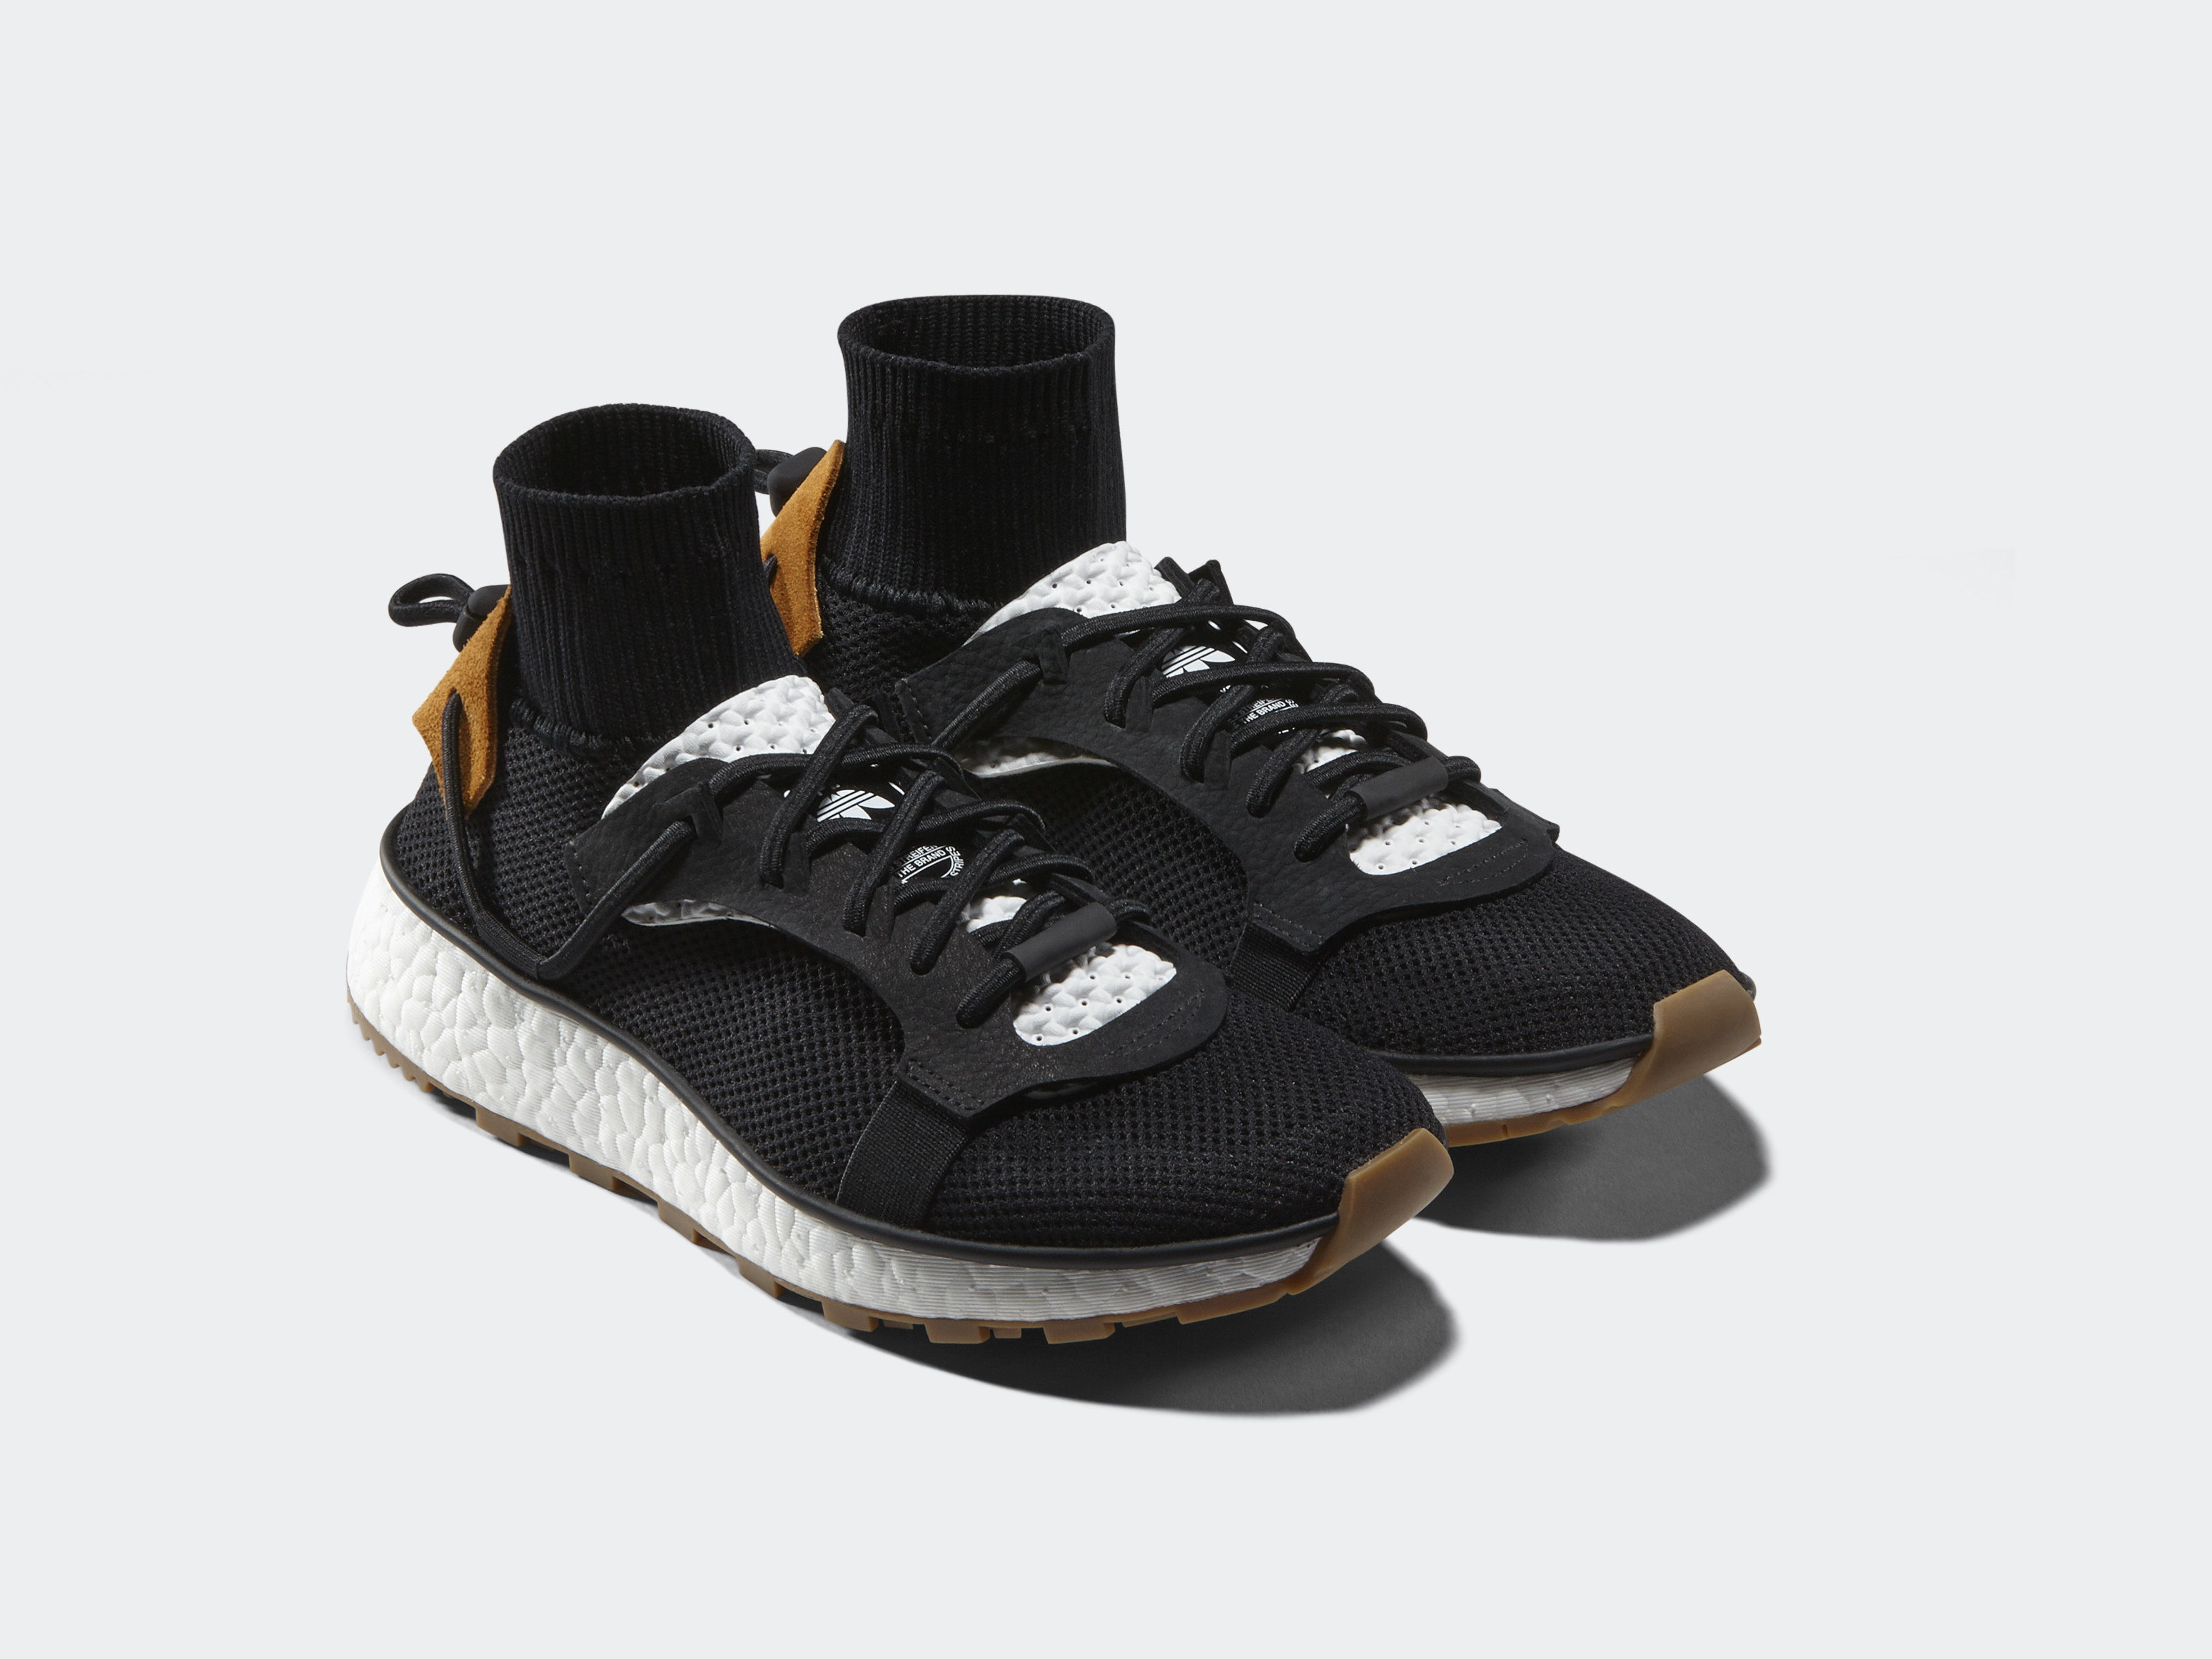 Alexander Wang's Adidas Sneakers Are Releasing Soon | Complex